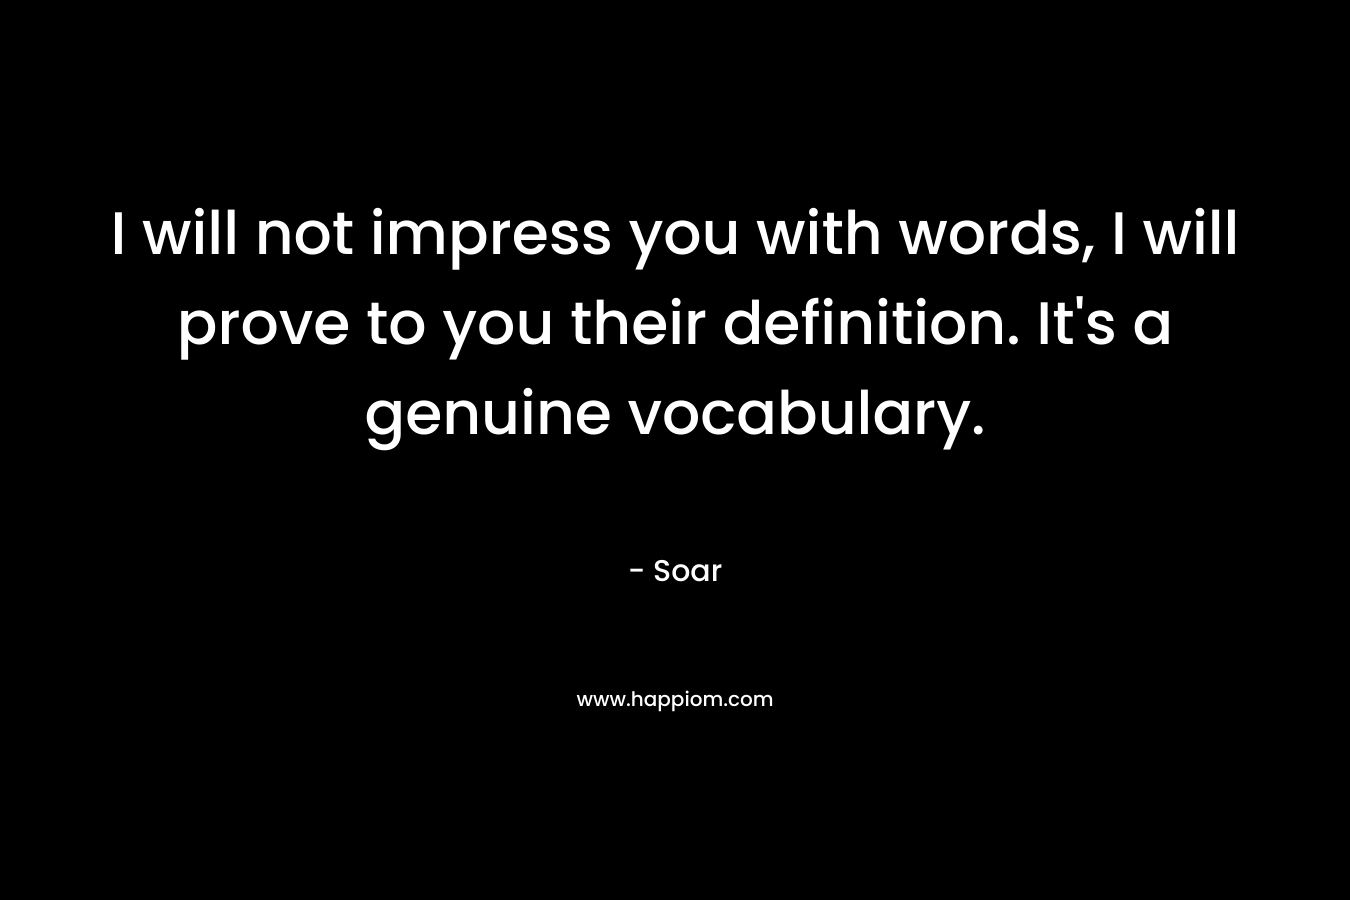 I will not impress you with words, I will prove to you their definition. It's a genuine vocabulary.